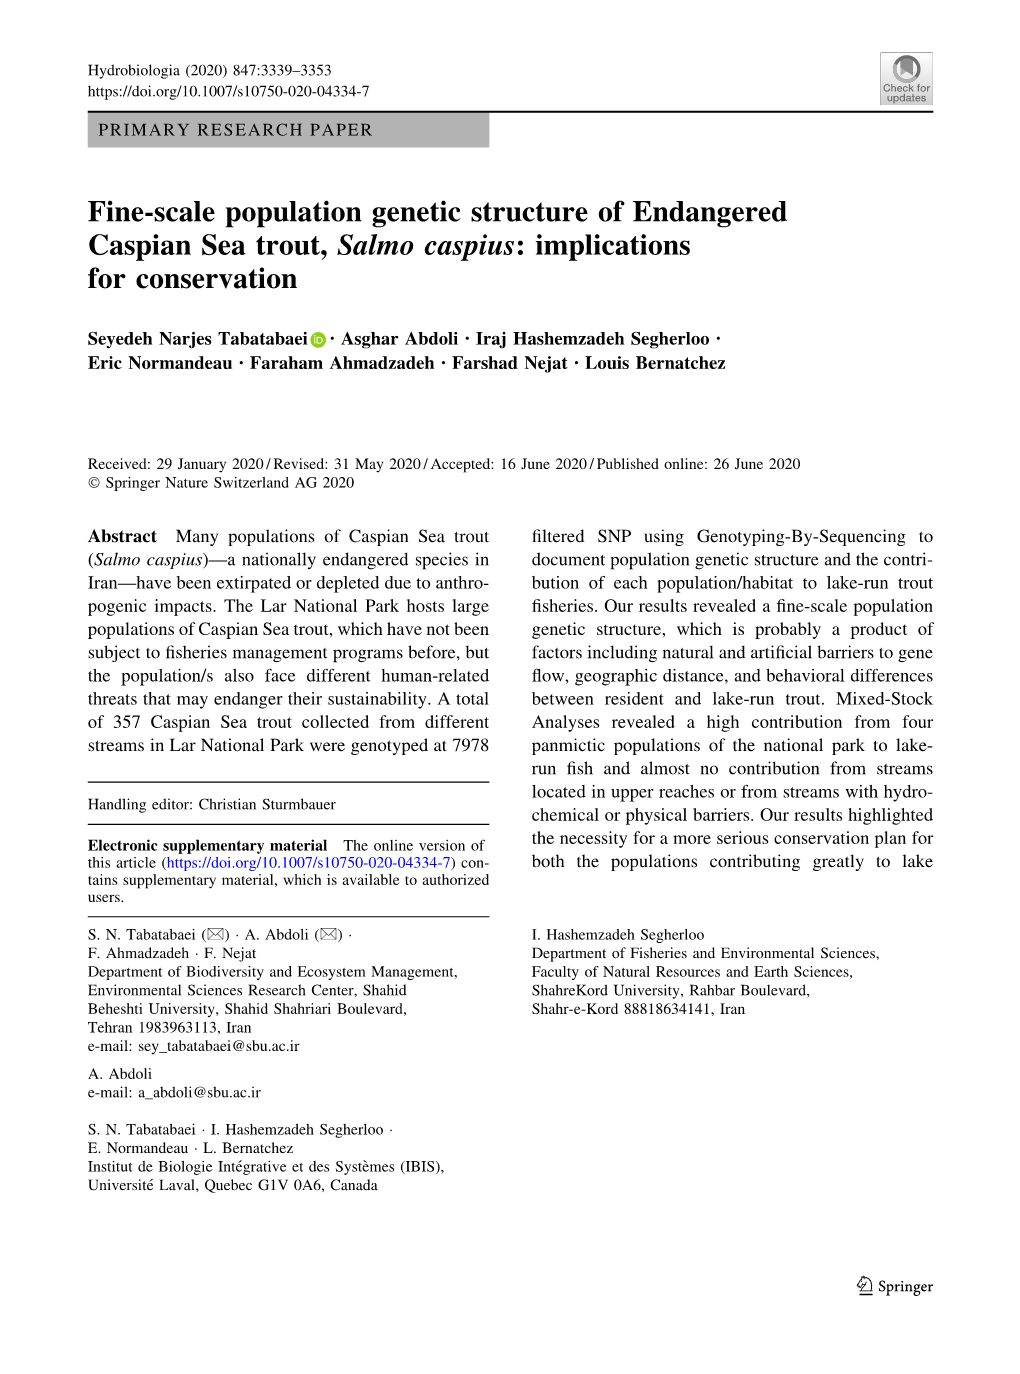 Fine-Scale Population Genetic Structure of Endangered Caspian Sea Trout, Salmo Caspius: Implications for Conservation